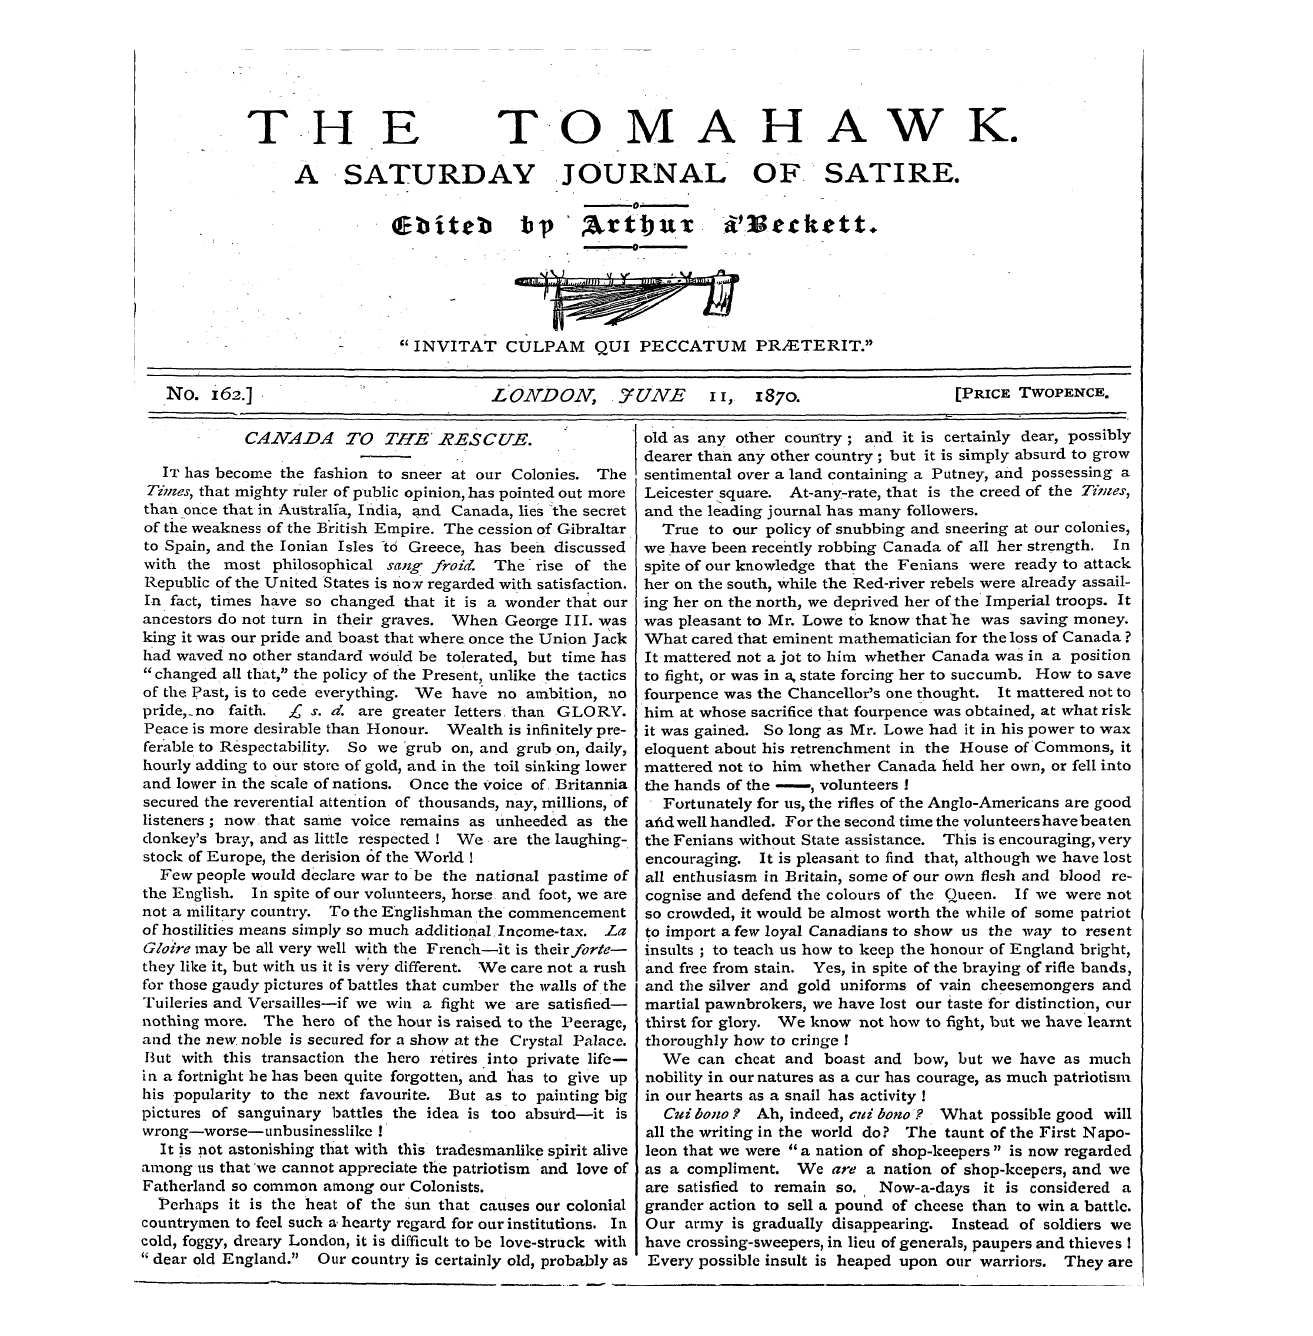 Tomahawk (1867-1870): jS F Y, 1st edition - It Has Become The Fashion To Sneer At Ou...